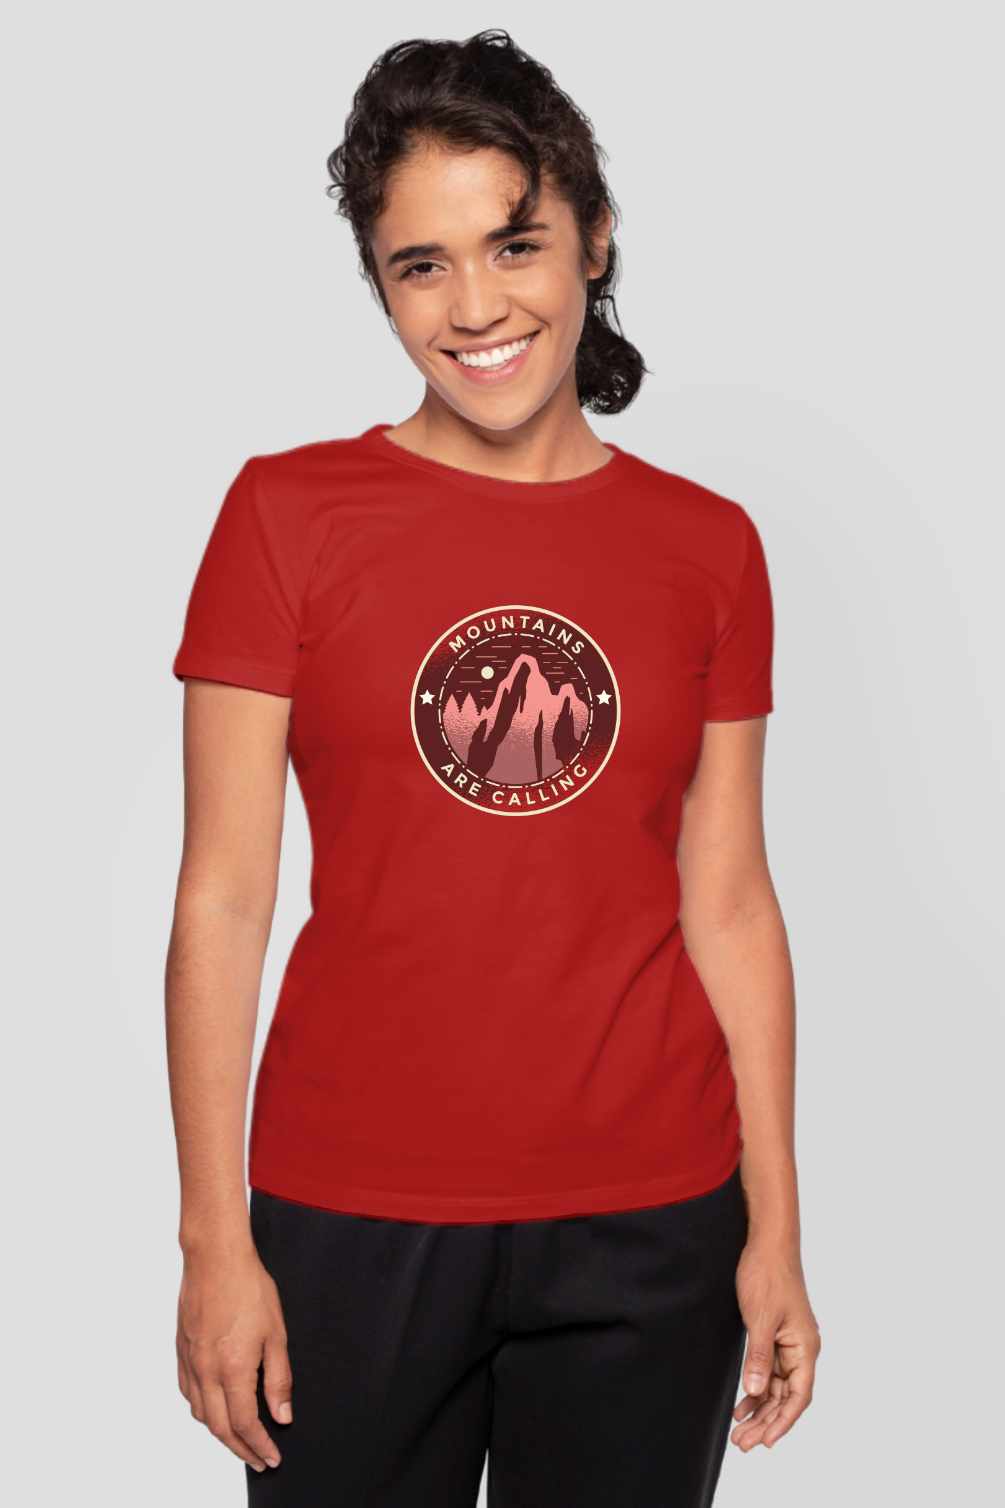 Mountains Are Calling Printed T-Shirt For Women - WowWaves - 8